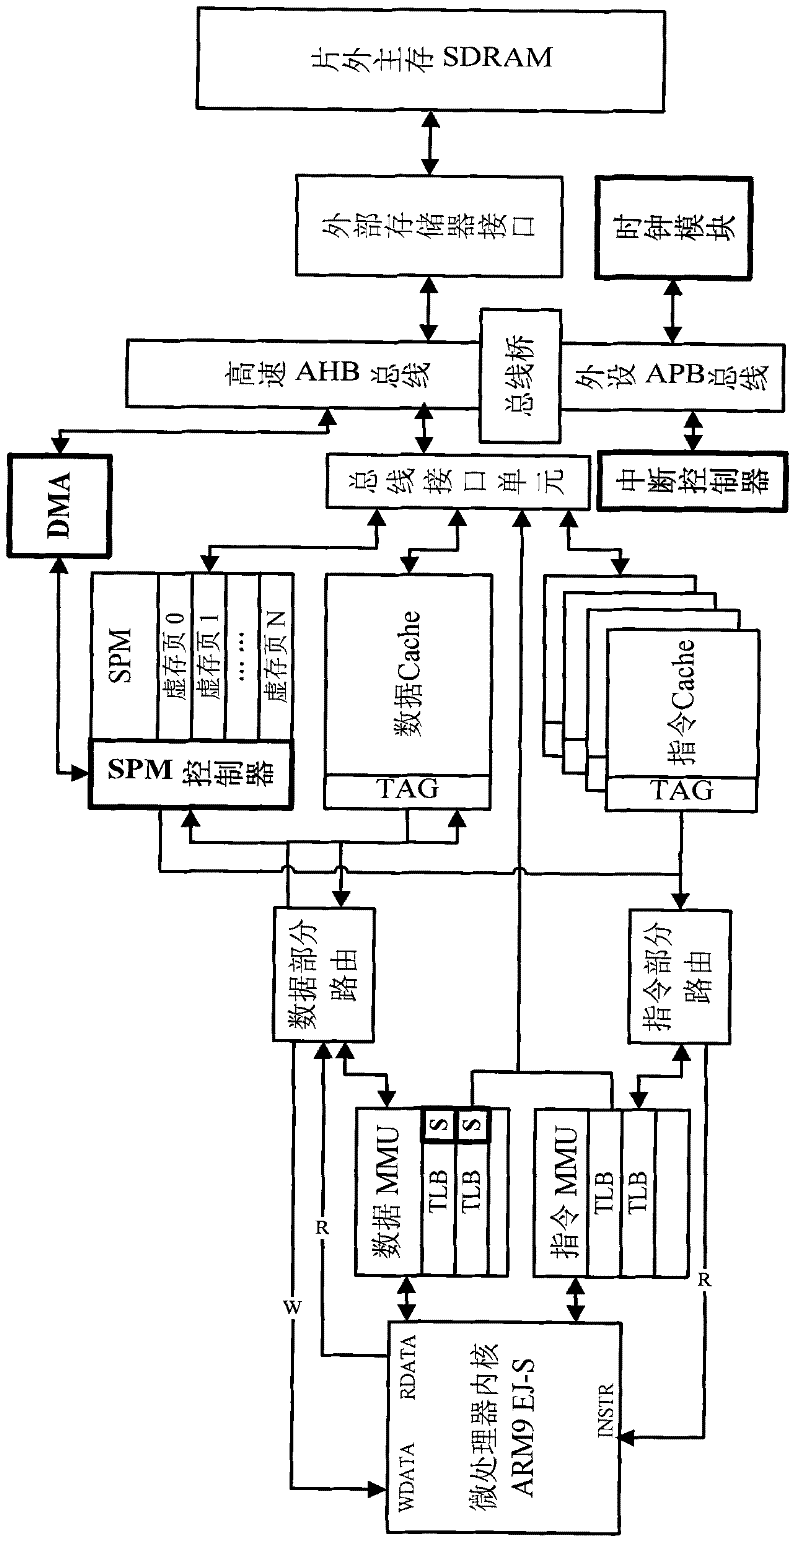 Method for dynamically allocating on-chip heterogeneous memory resources by utilizing virtual memory mechanism